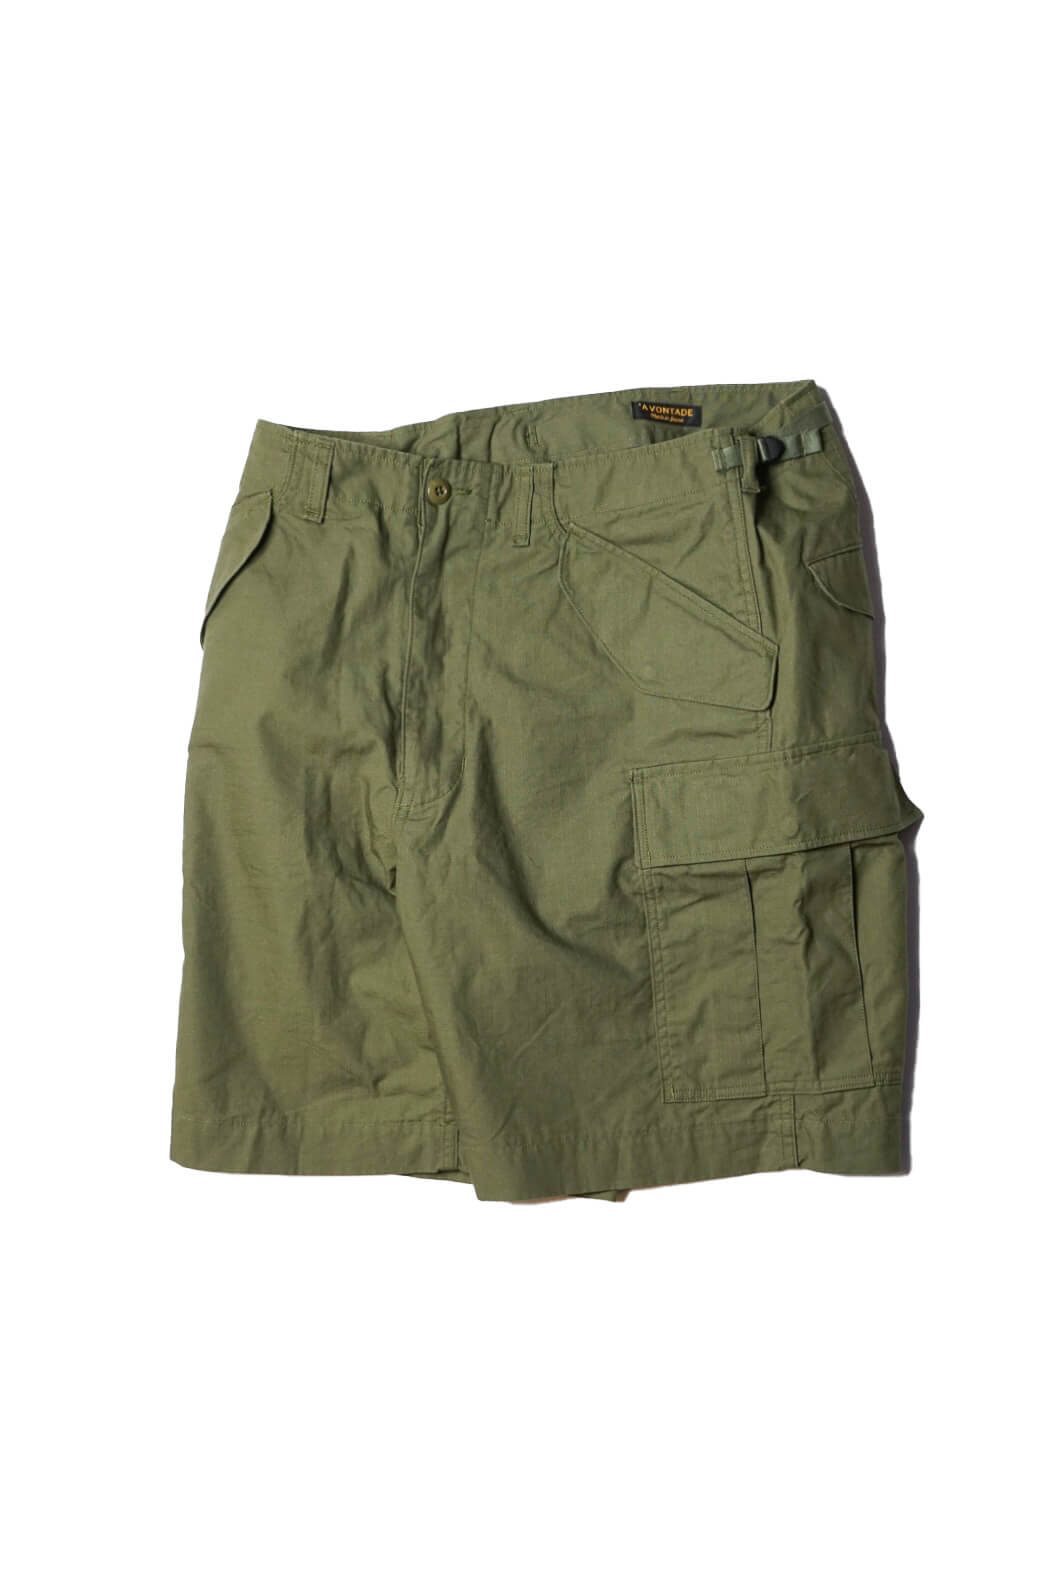 M-51 SHORTS - ARCH EXCLUSIVE